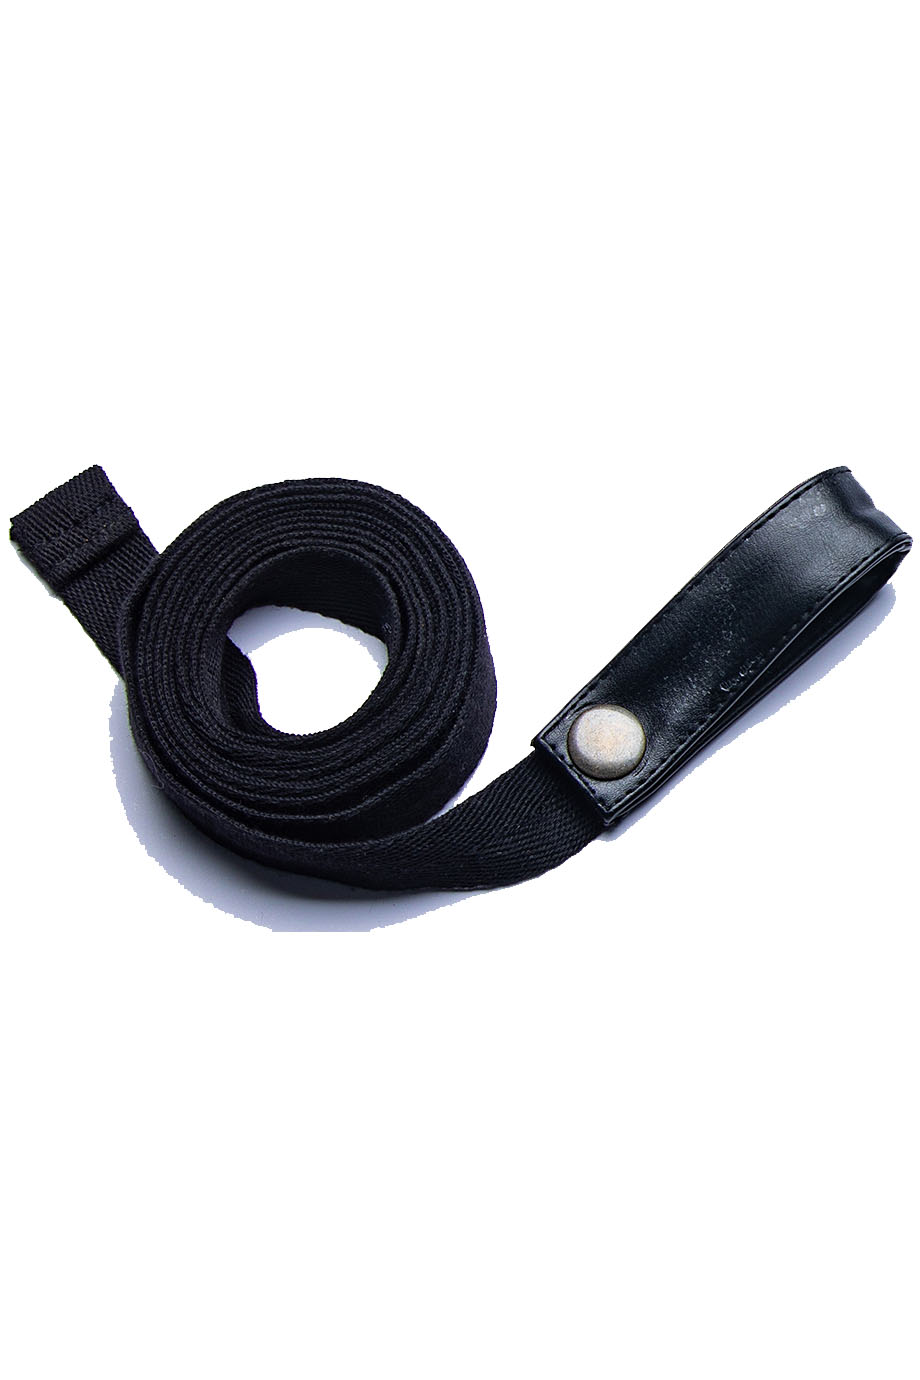 LEATHER APRON STRAPS (2-PACK)